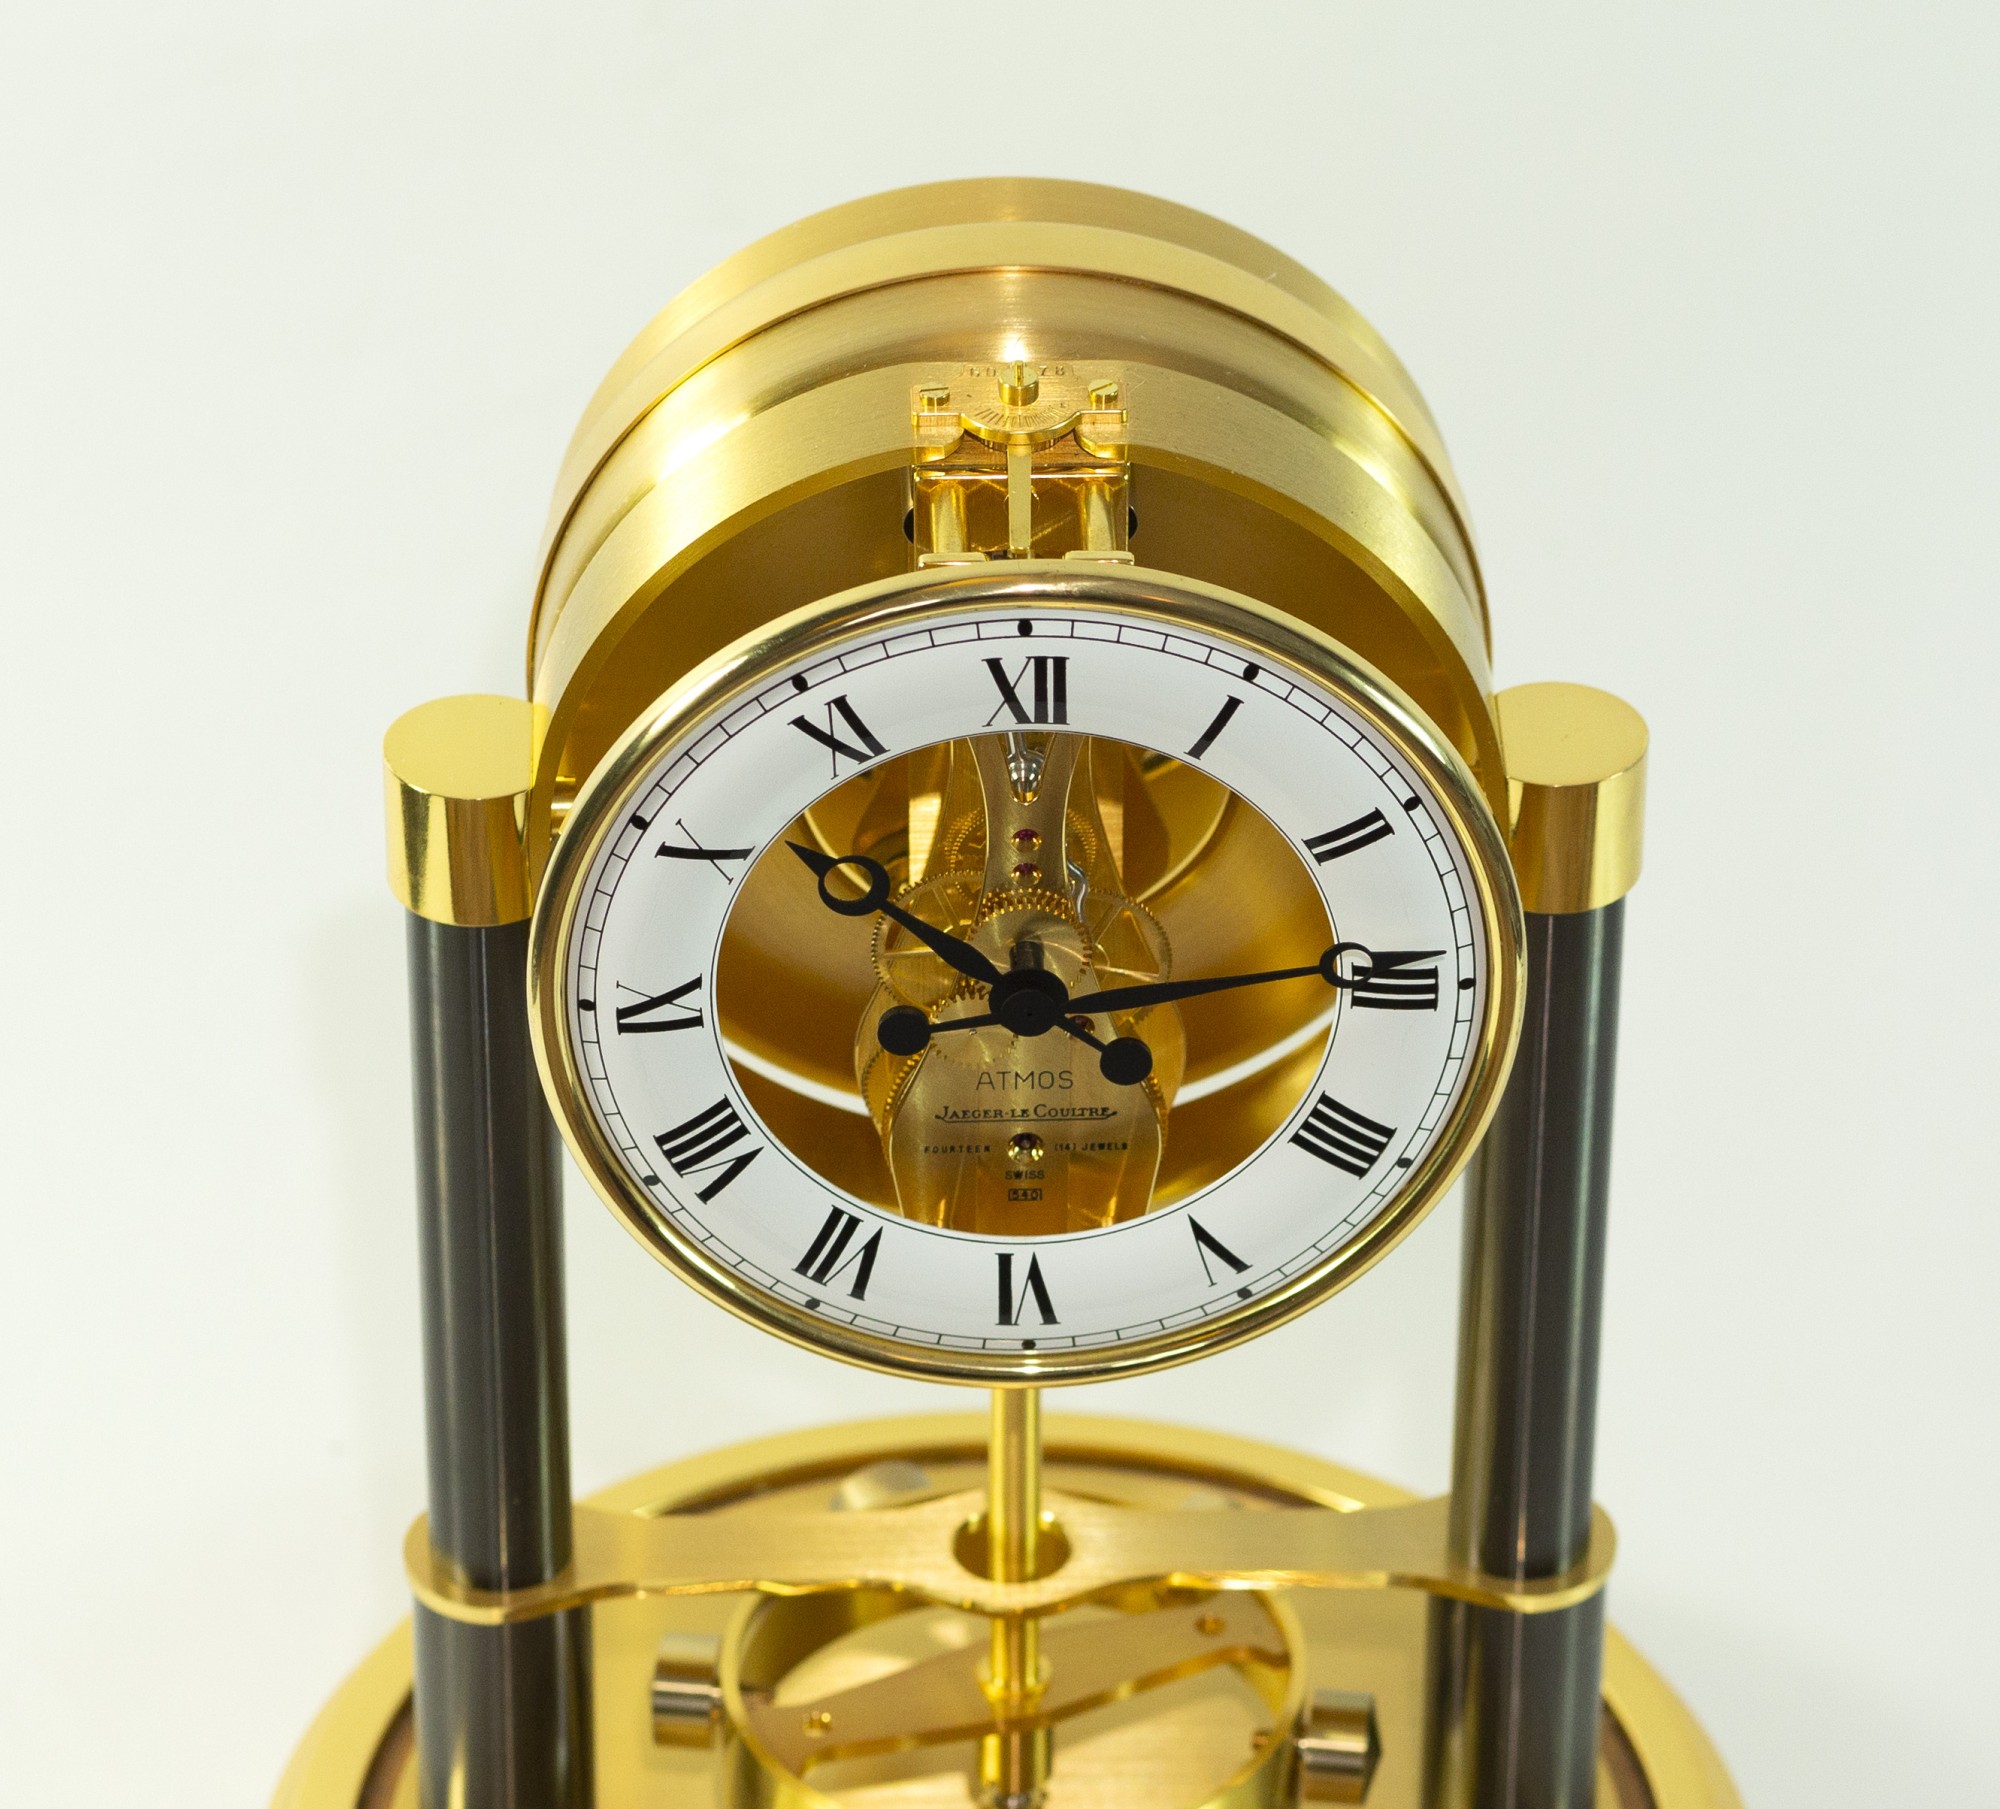 Jaeger leCoultre Atmos clock, made for the 150th anniversary - Carlton ...